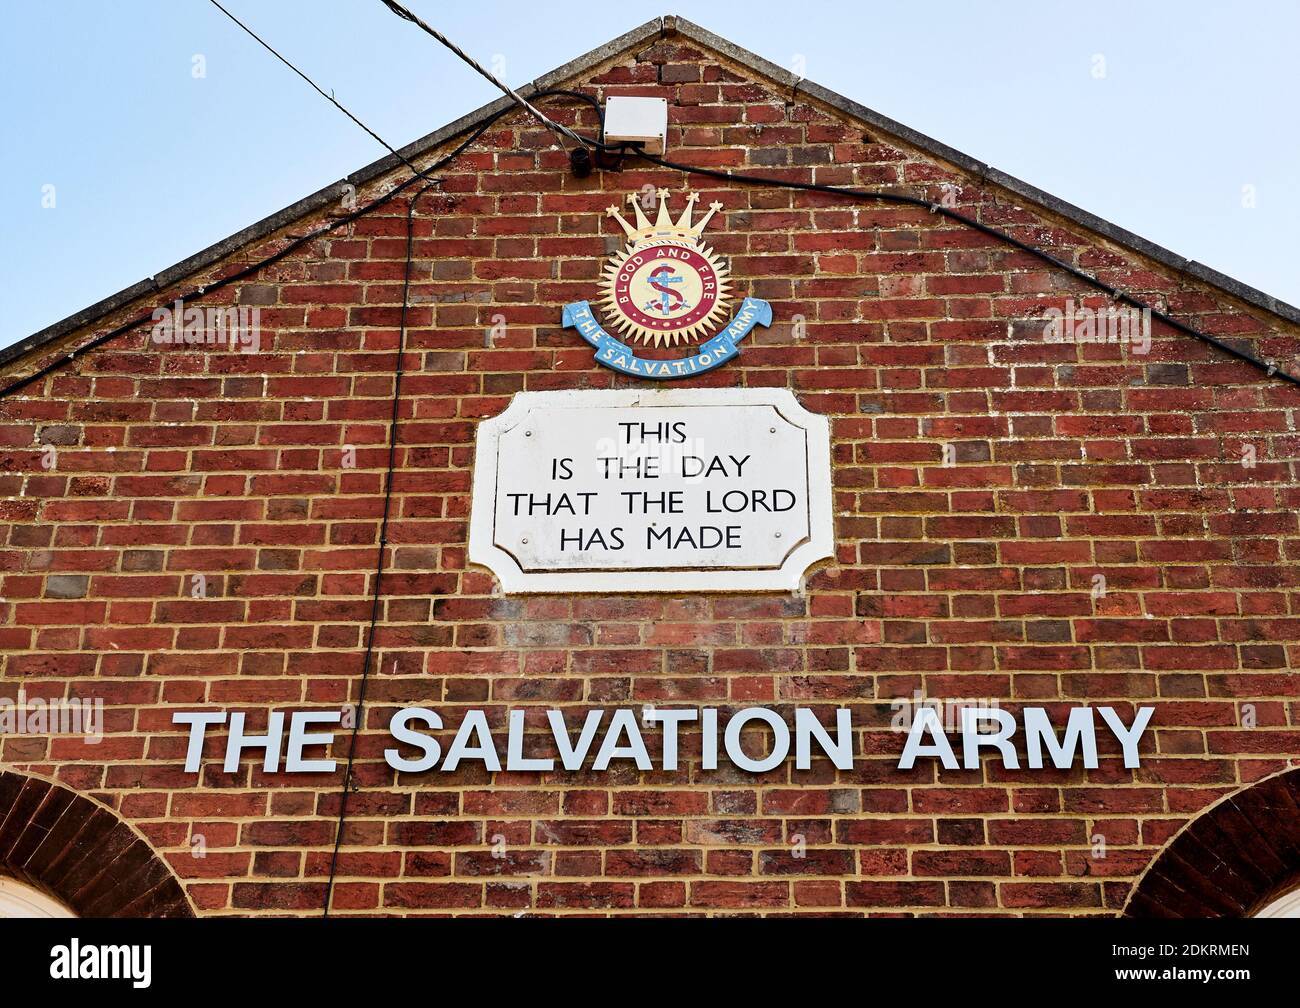 The Salvation Army Sign on a Building, Founded in 1865 in East London, The salvation army helps the poor and homeless, Kent, England - 11 May 2020 Stock Photo